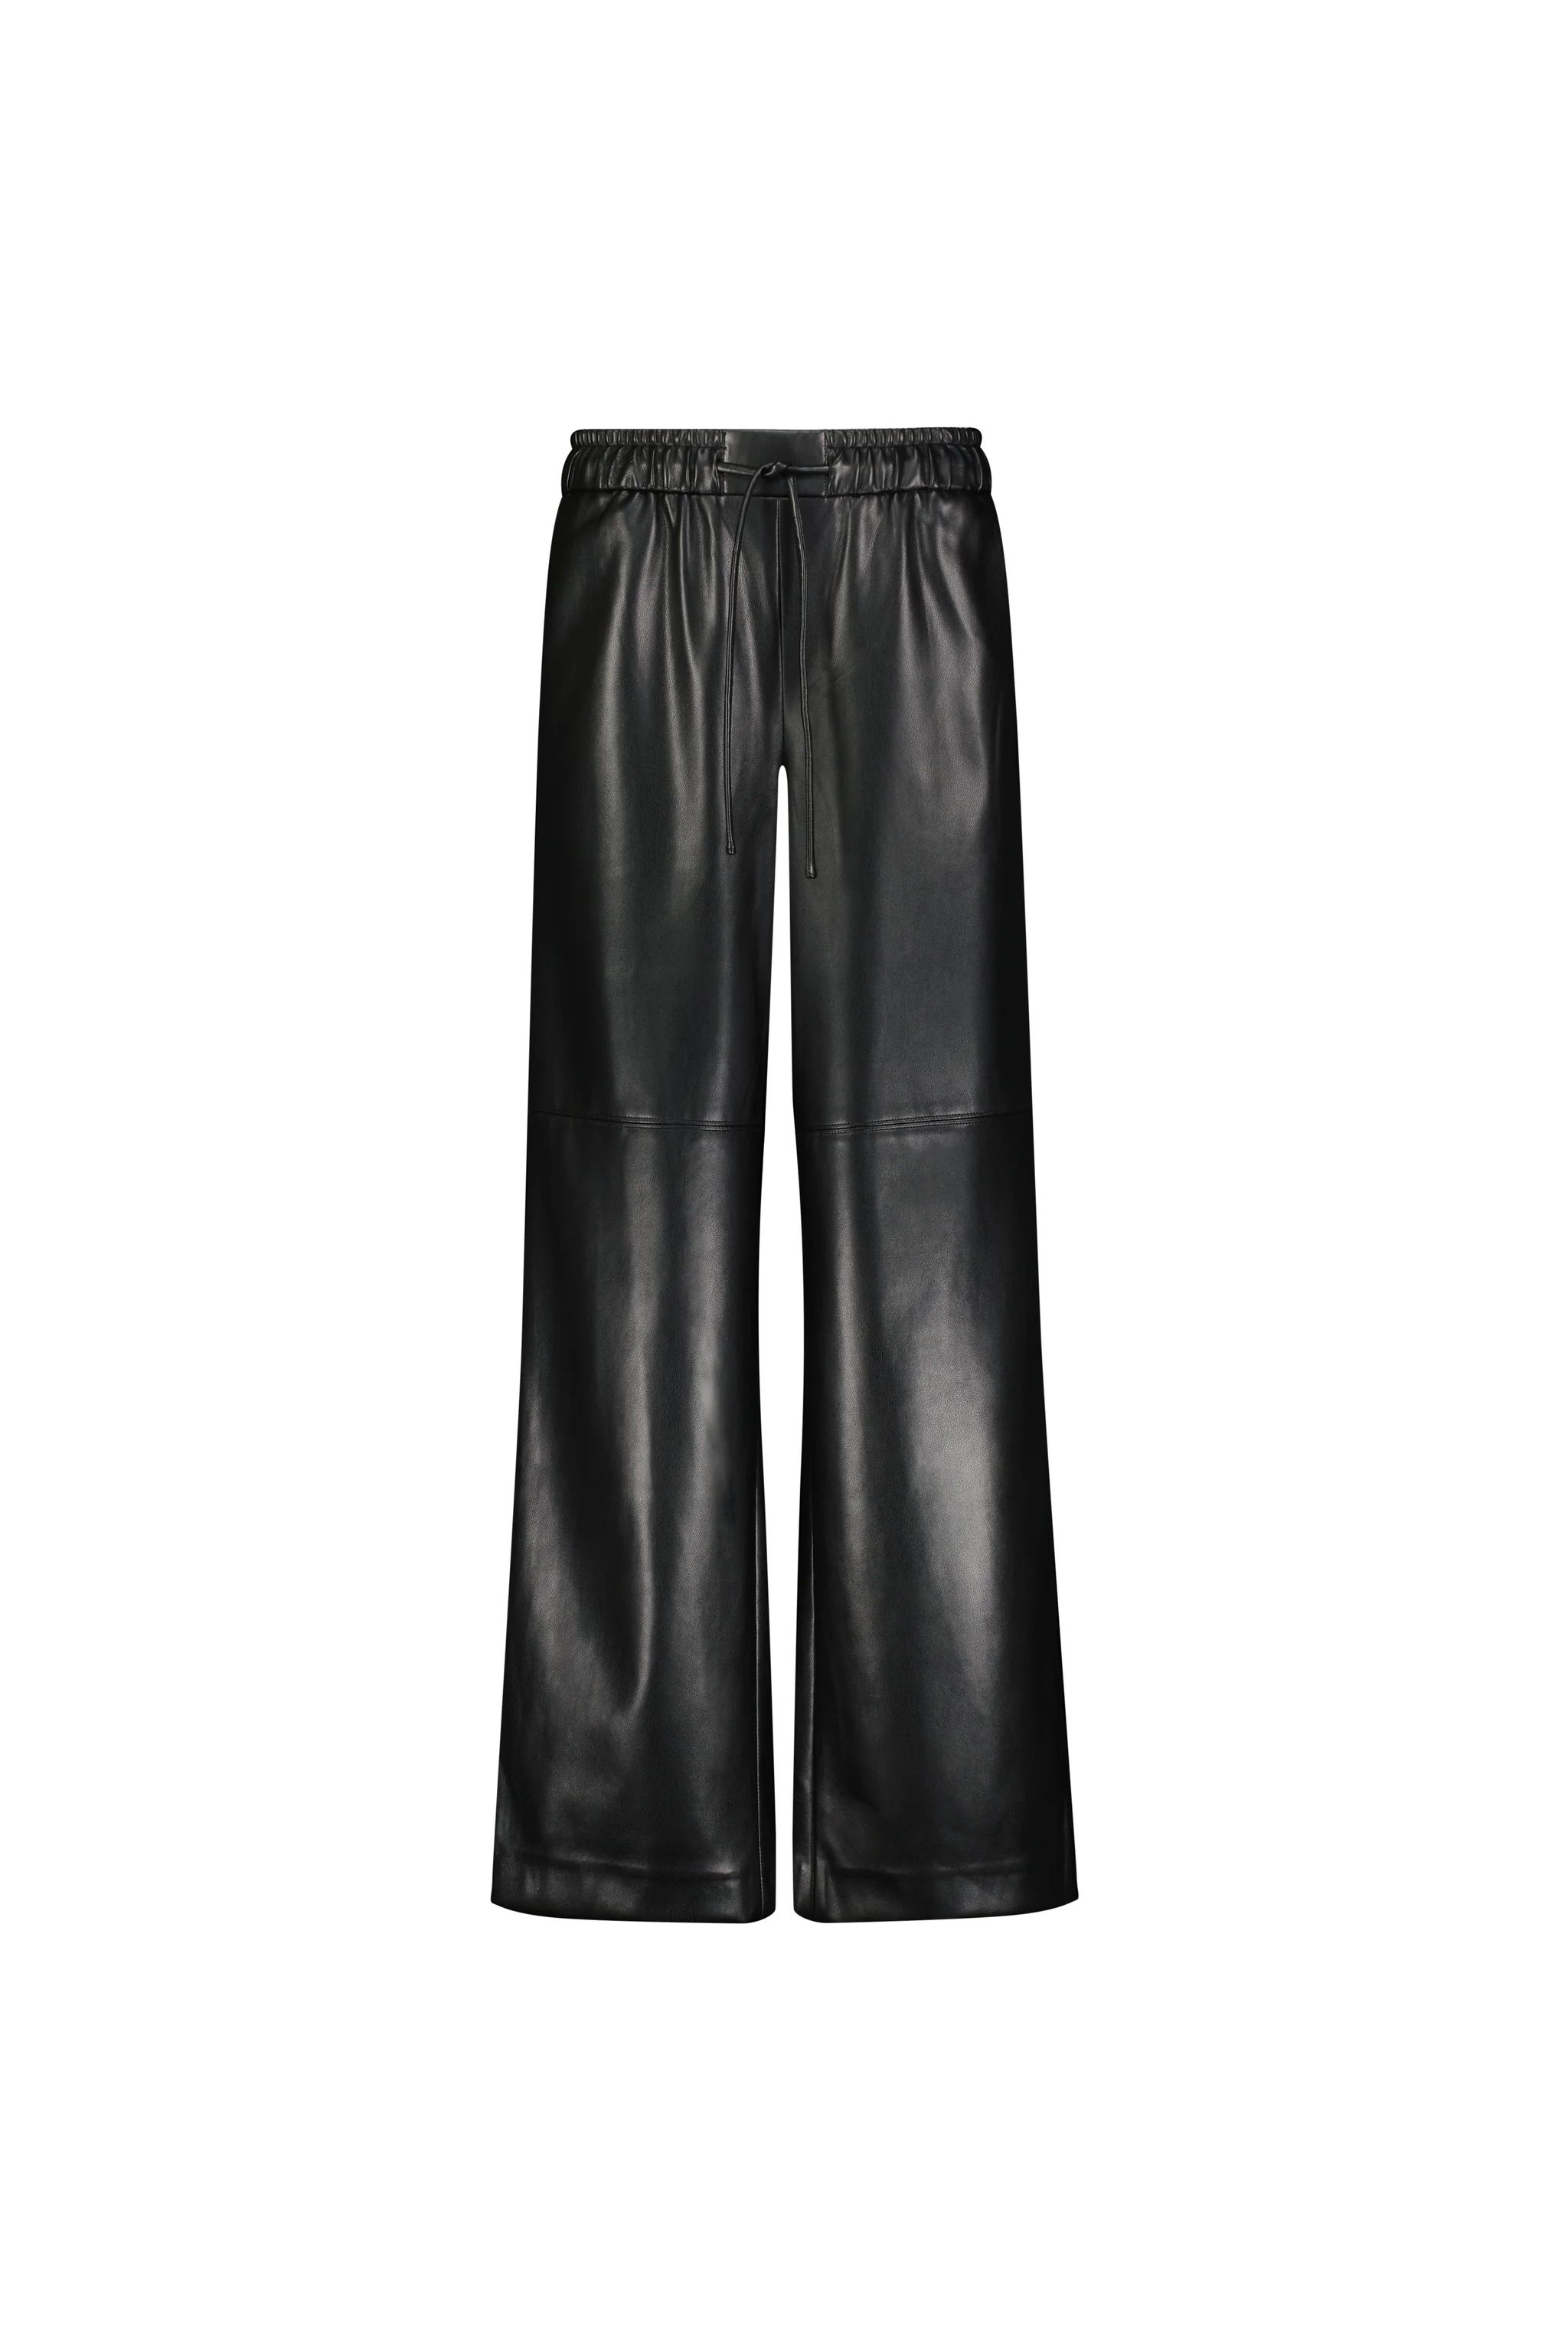 Vegan Leather Relaxed Drawstring Pant | MAYSON the label